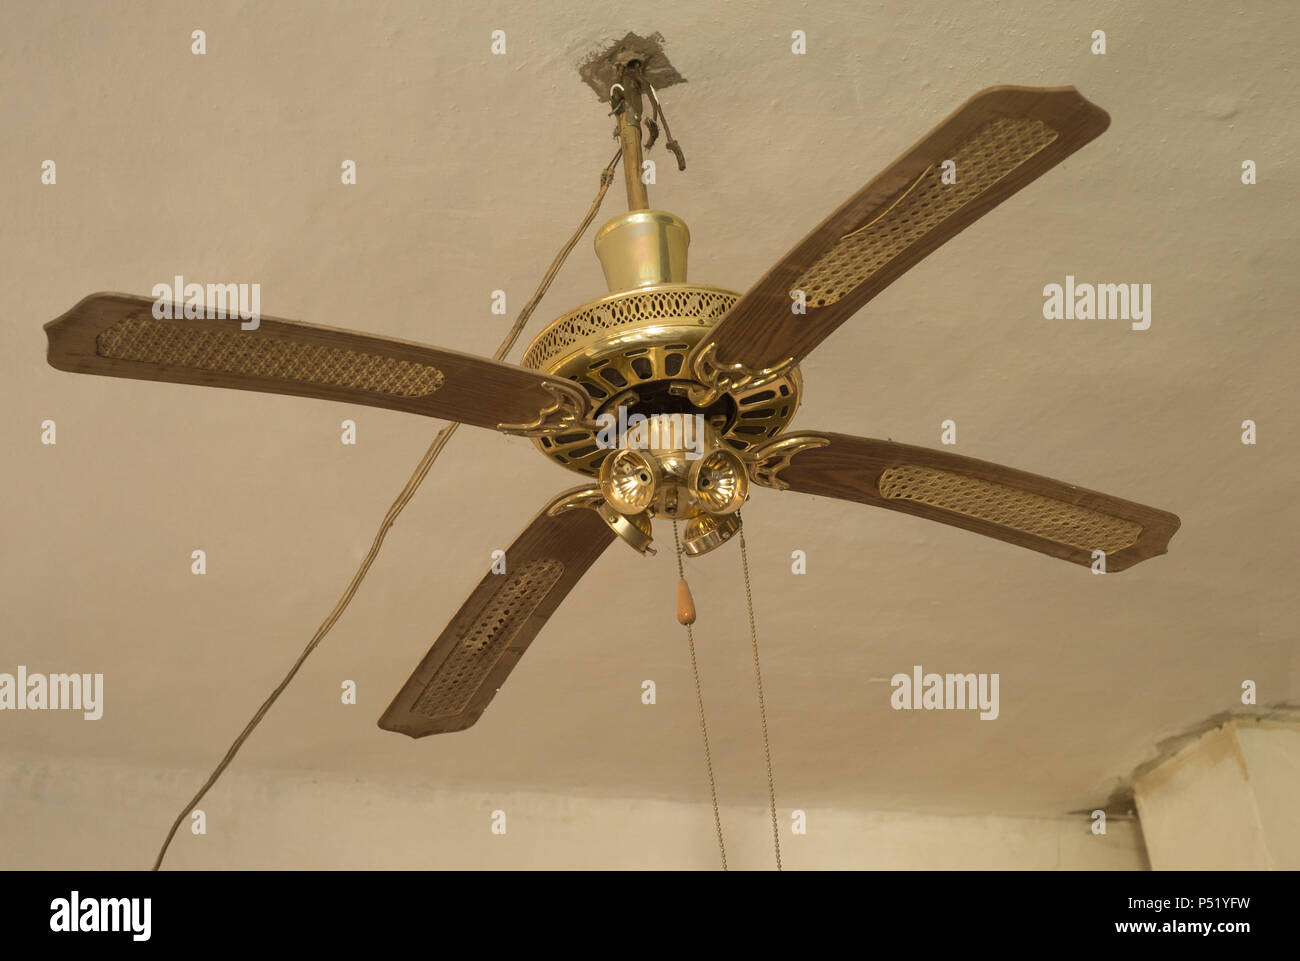 Historic fan on a ceiling Stock Photo